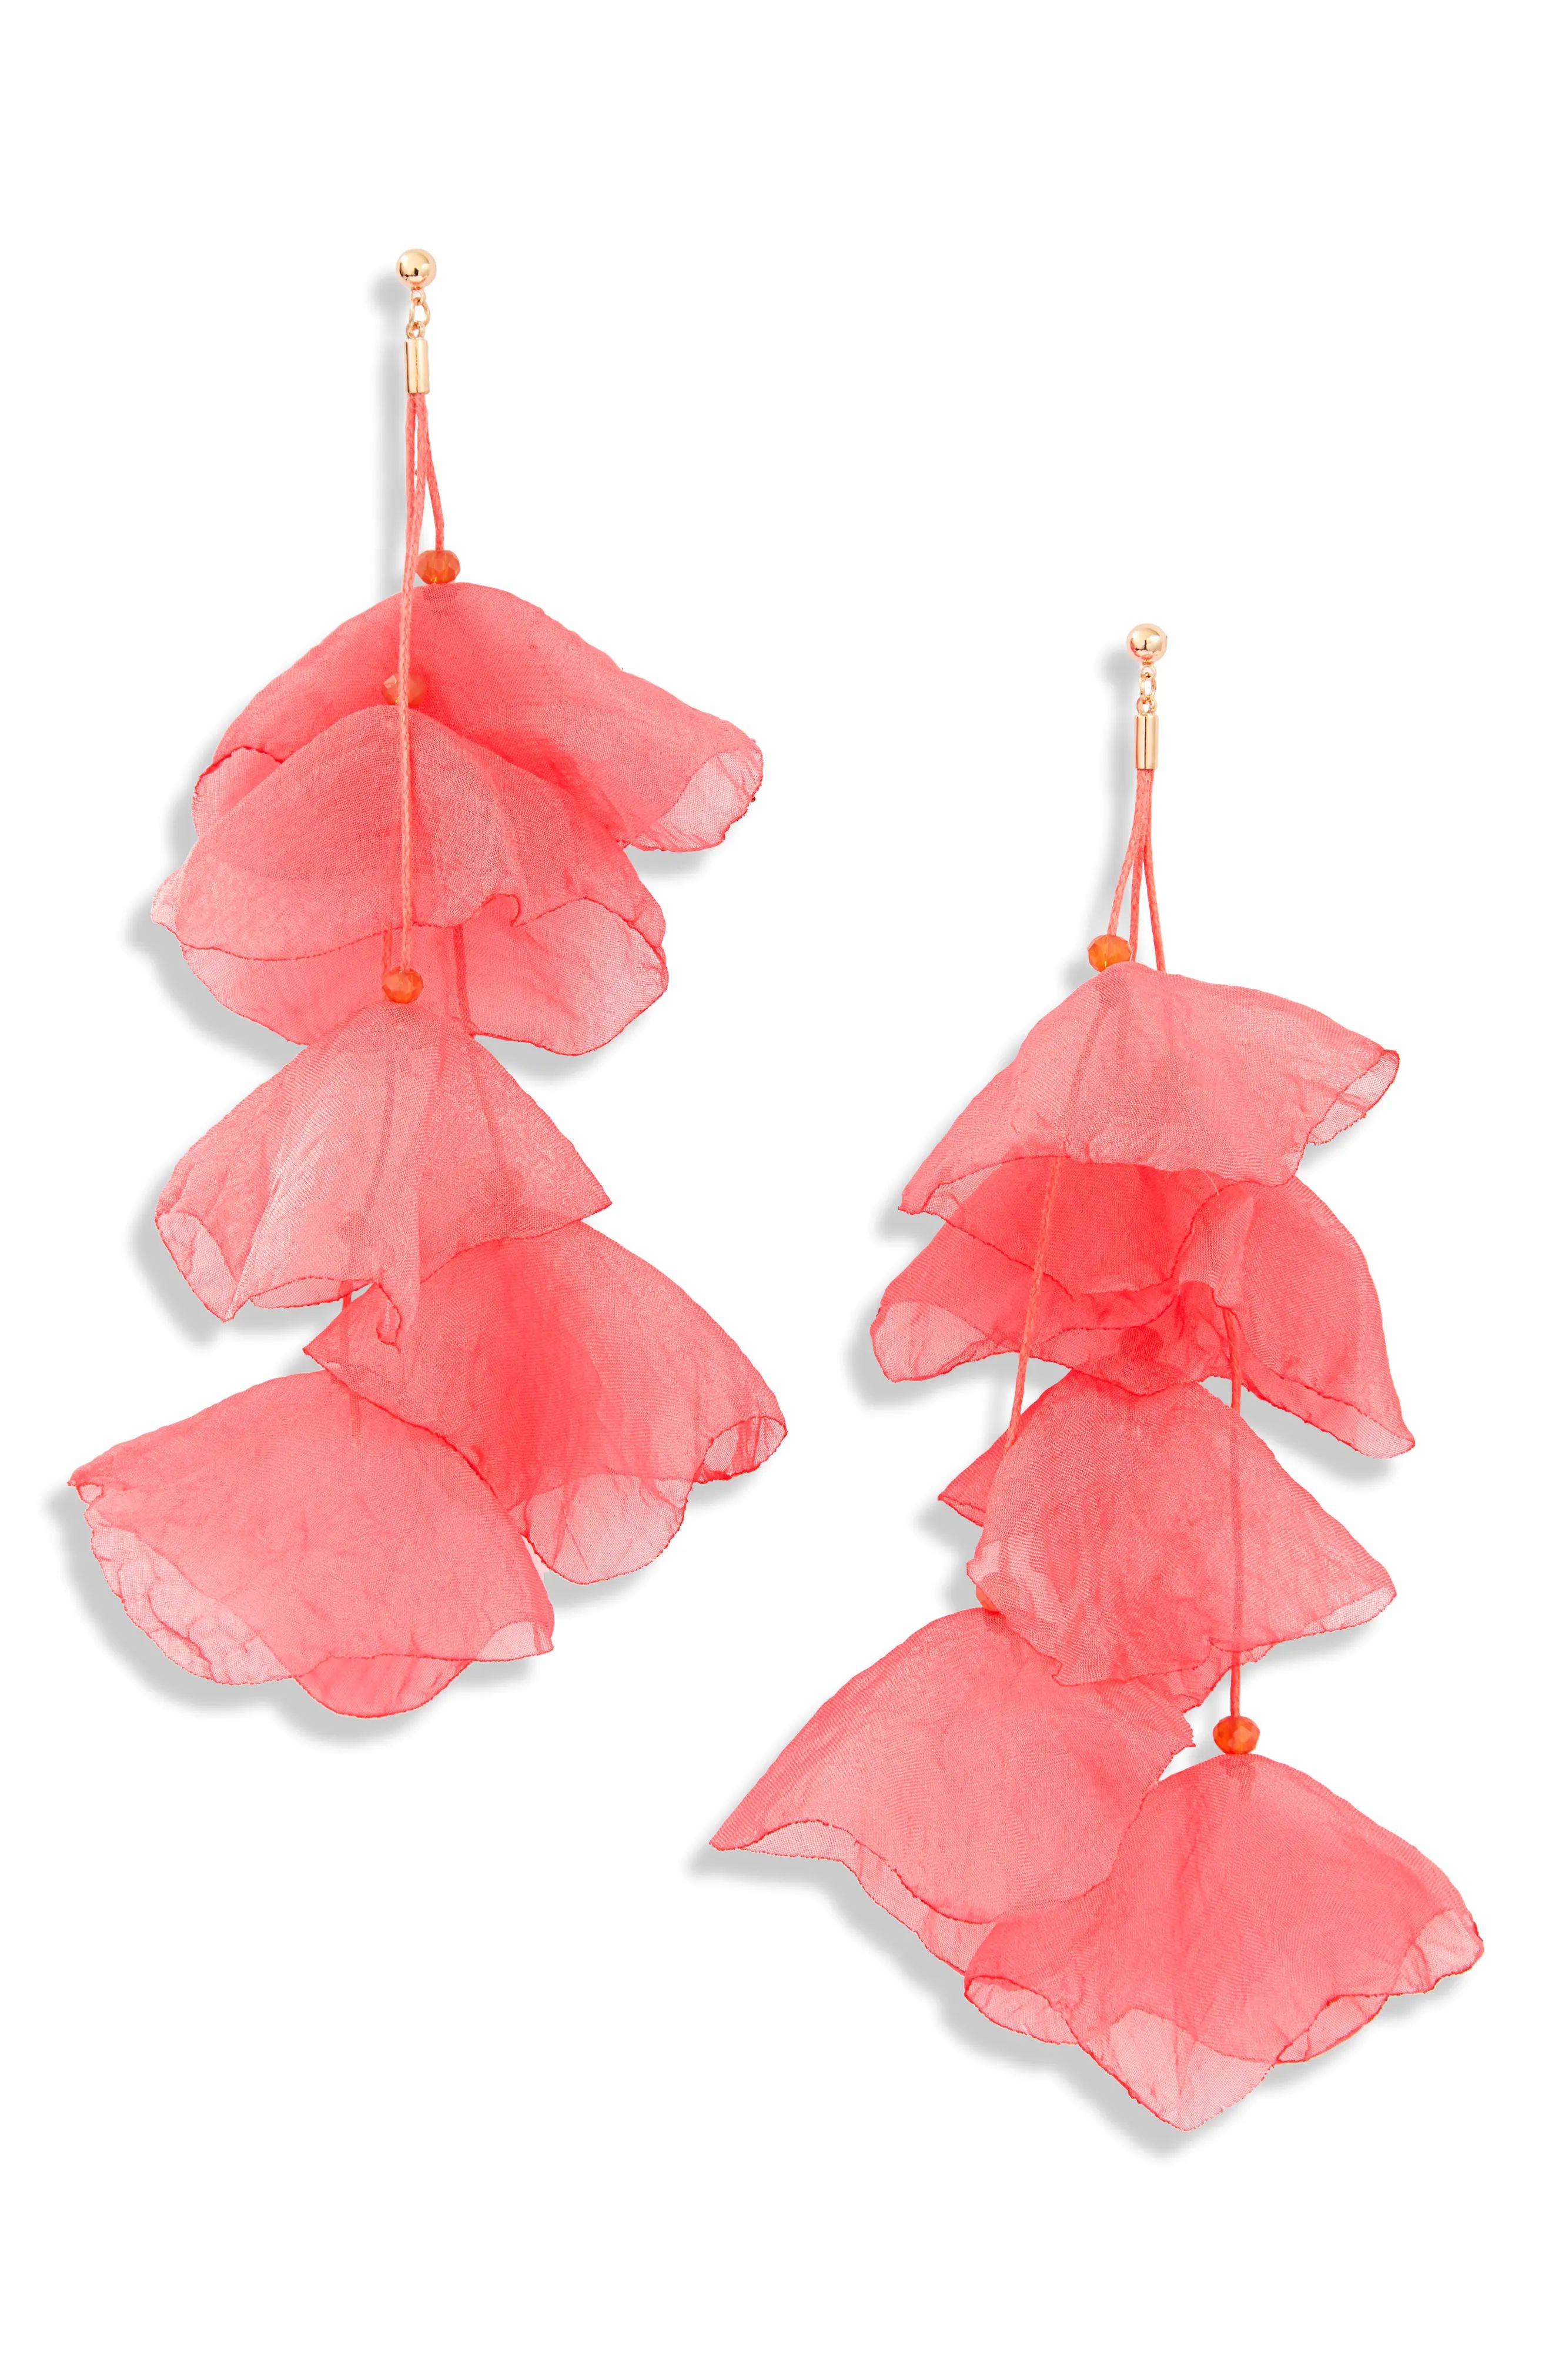 Stella + Ruby Lily Chiffon Flower Earrings in Gold/Coral Sorbet at Nordstrom | Nordstrom